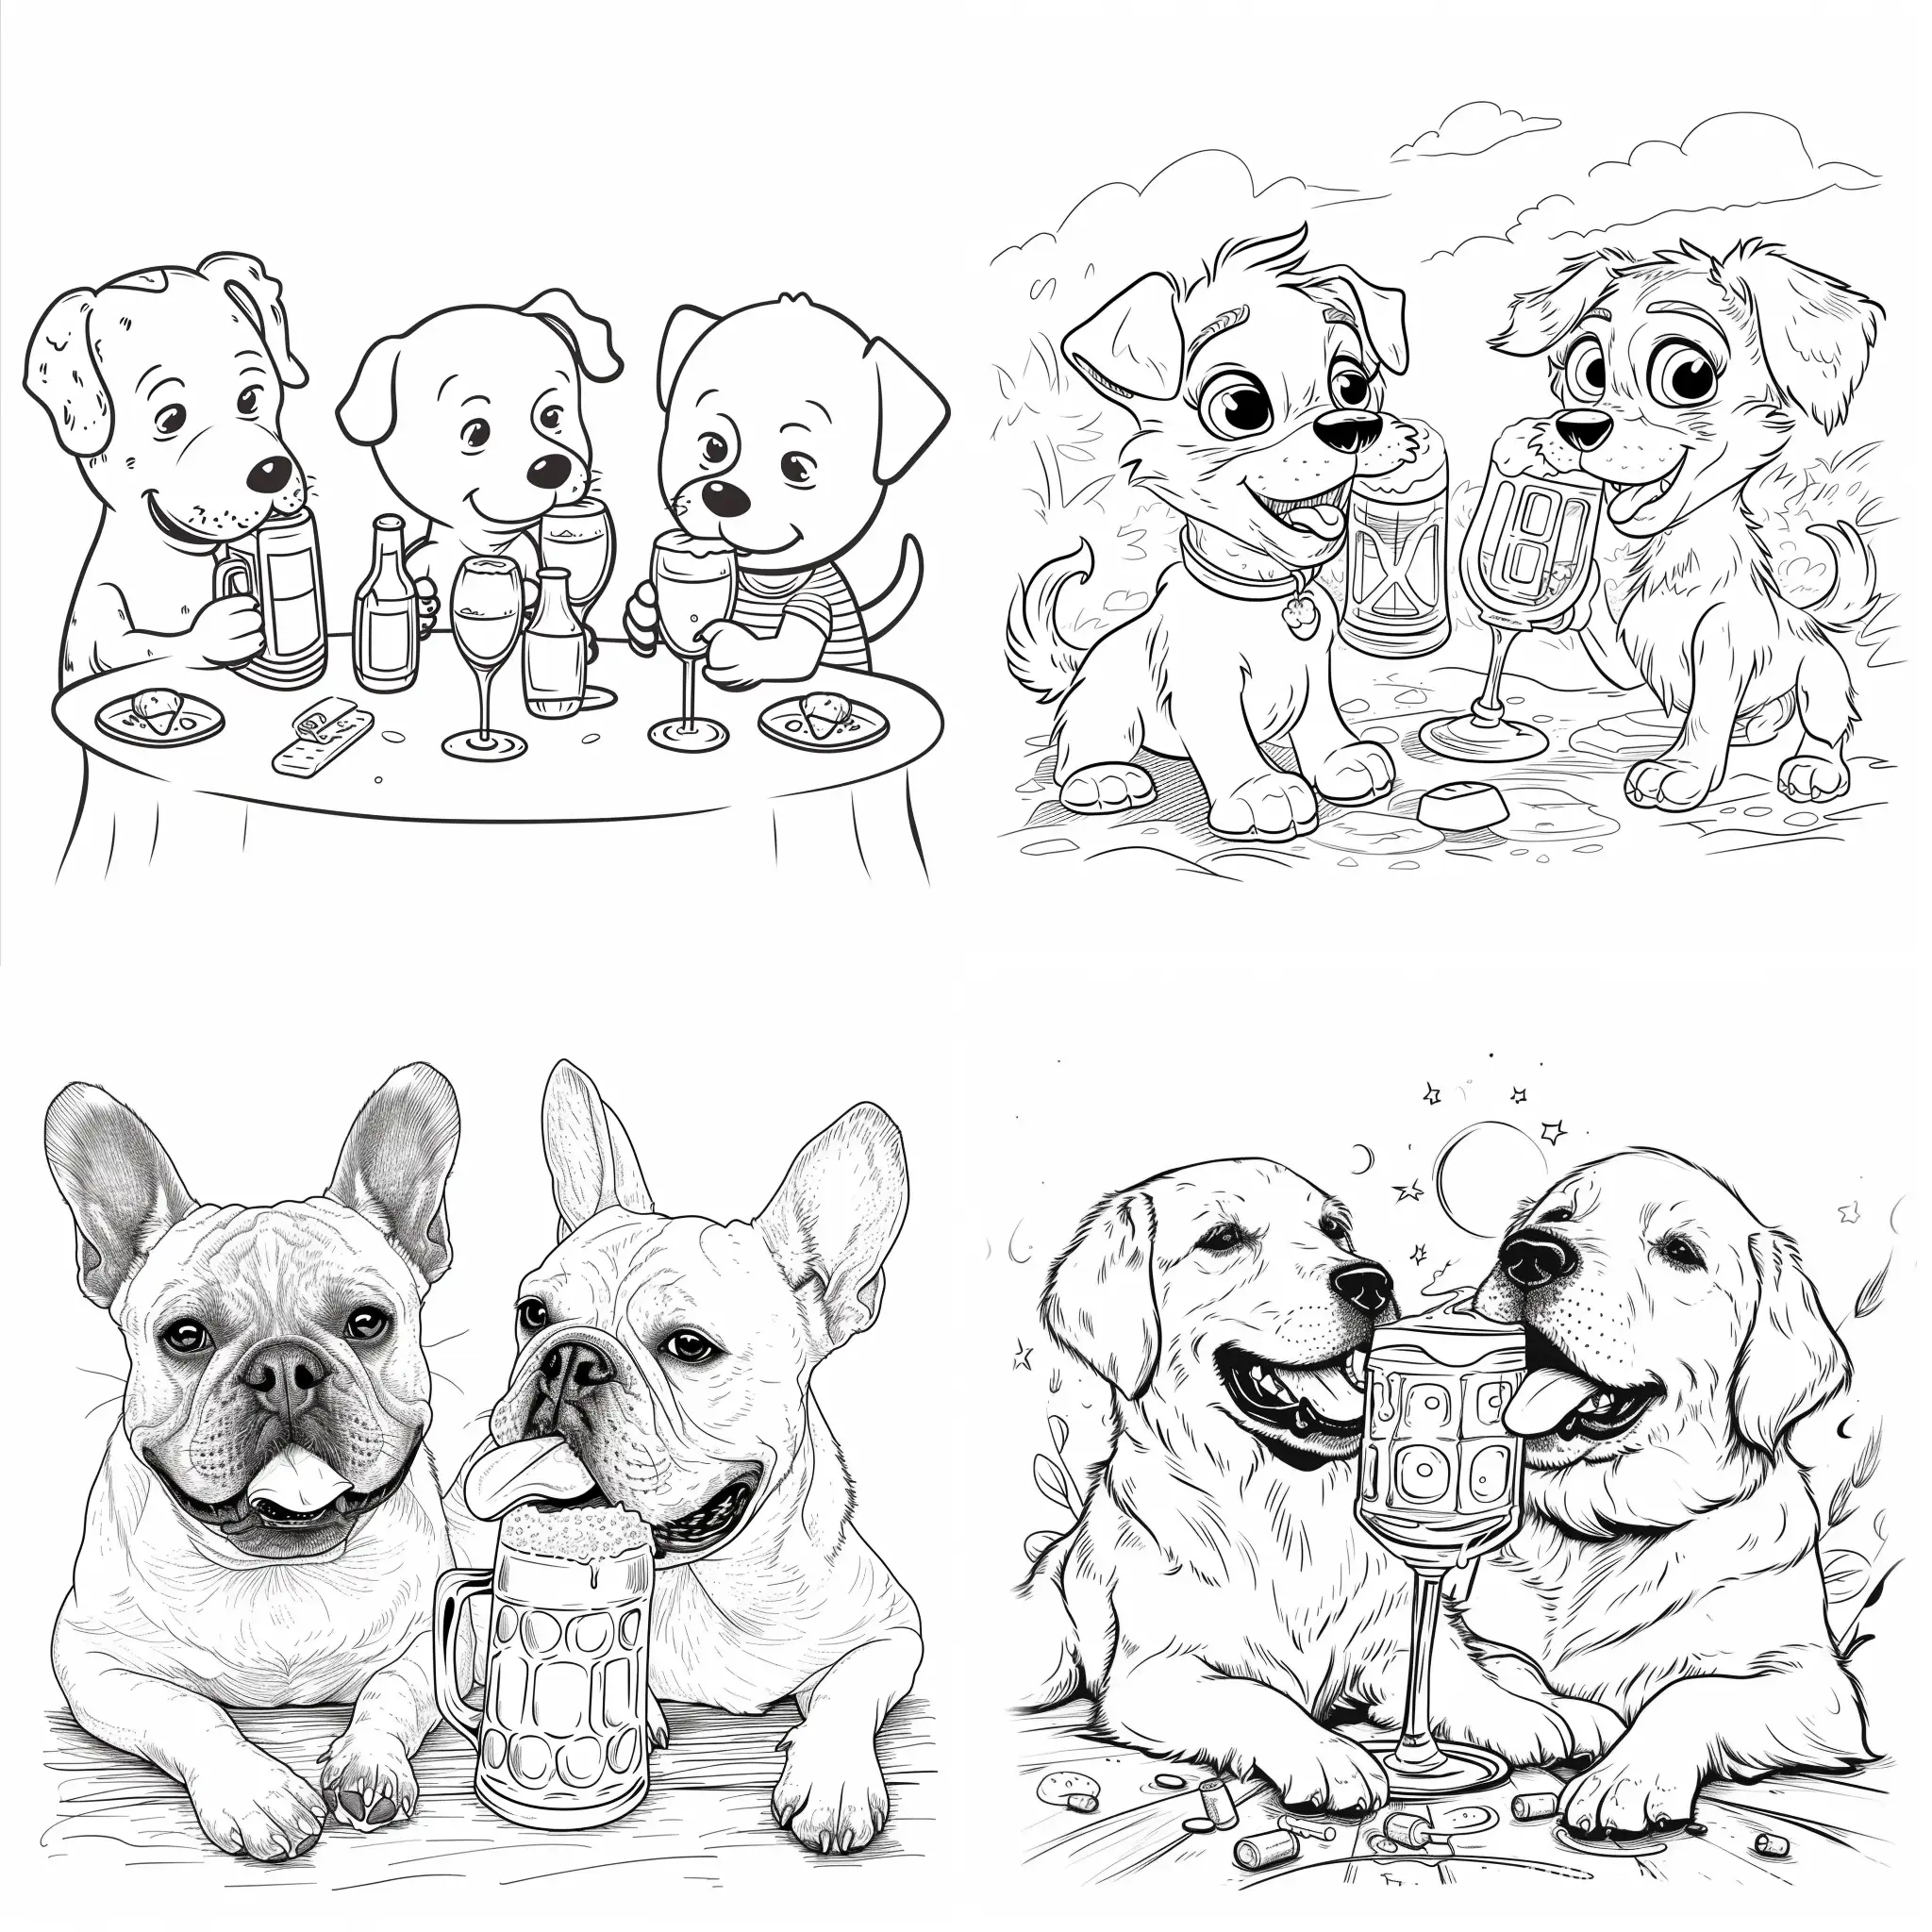 Adorable-Dogs-Enjoying-Colorful-Beverages-in-a-Simple-Coloring-Book-for-3YearOlds